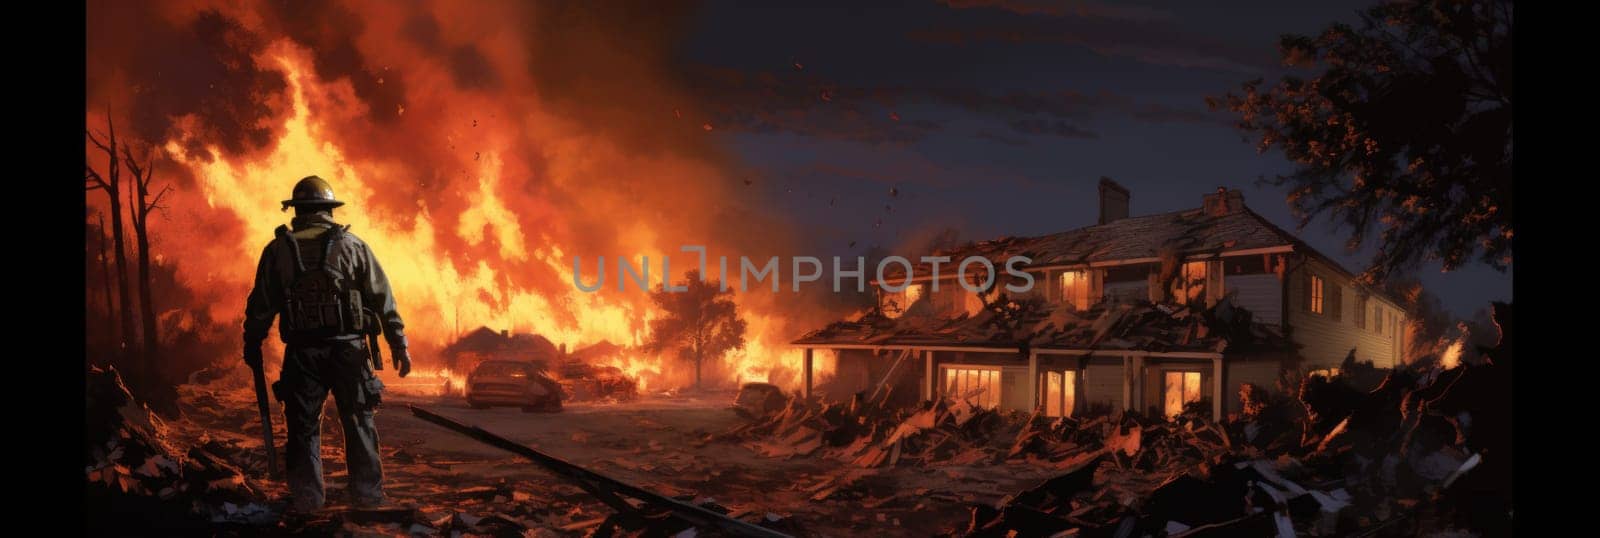 A man bravely stands in front of a raging fire as firefighters work diligently to extinguish it for the safety of all.